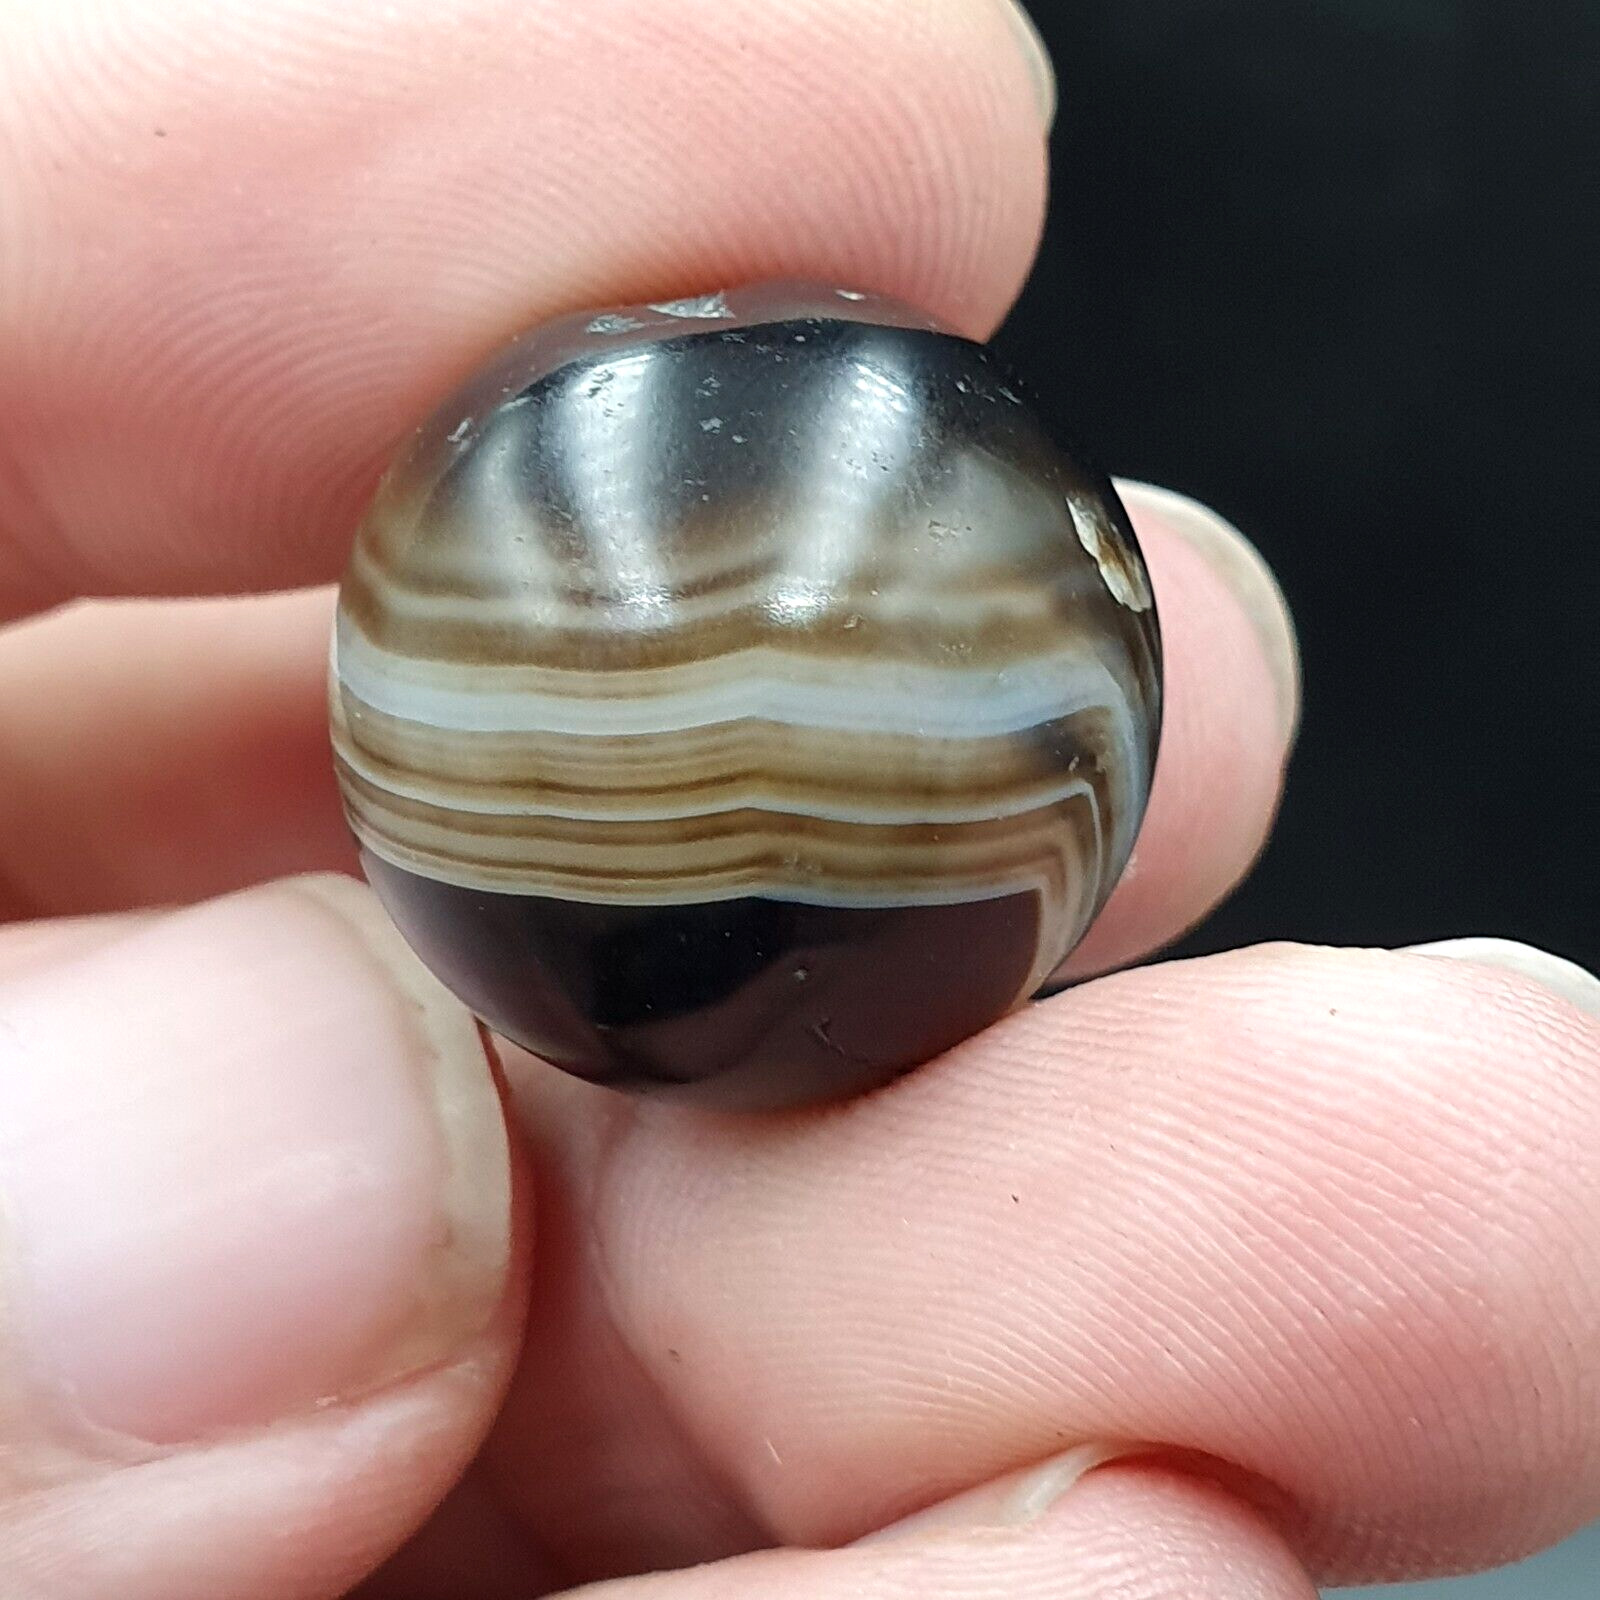 AA Antique Ancient INDO Himalaya Agate stone Bead Suleimani Agate 19.5mm